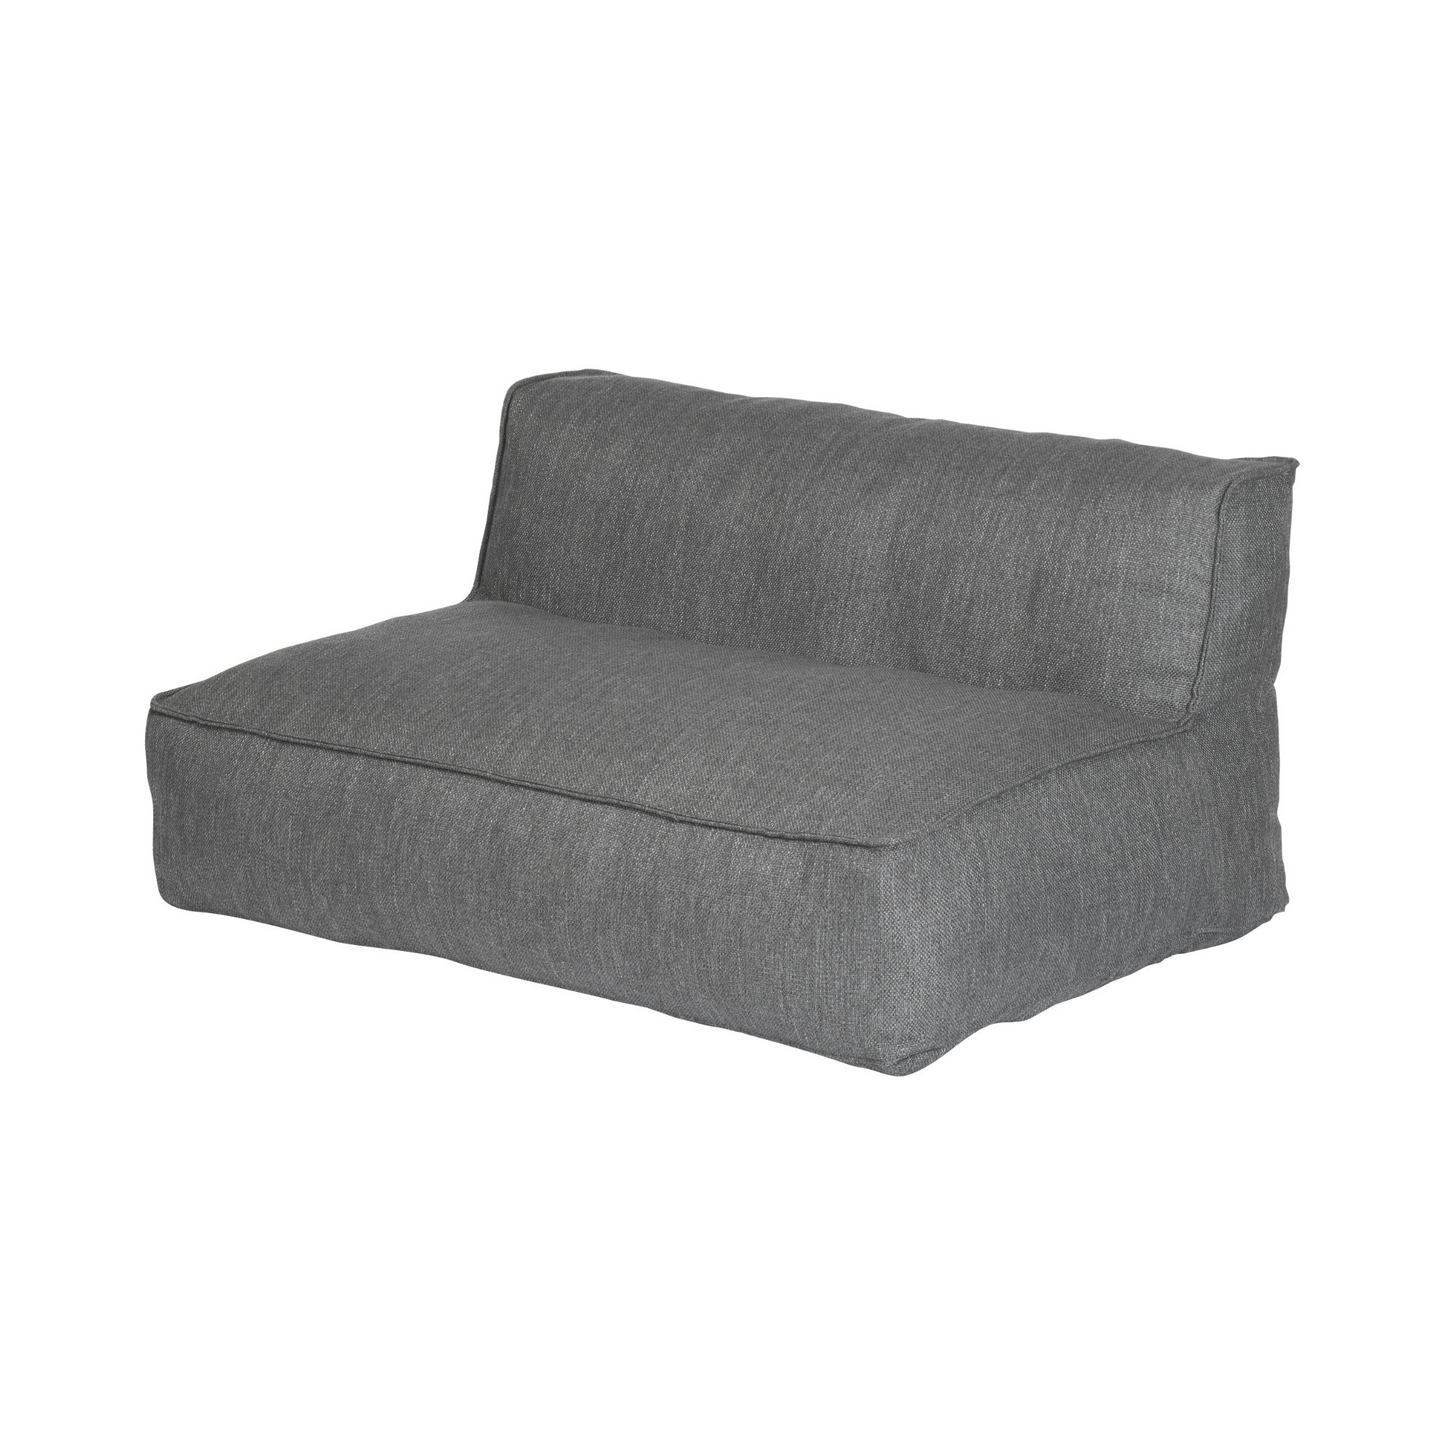 Blomus Germany Grow Double Sectional Outdoor Seat Coal 62072